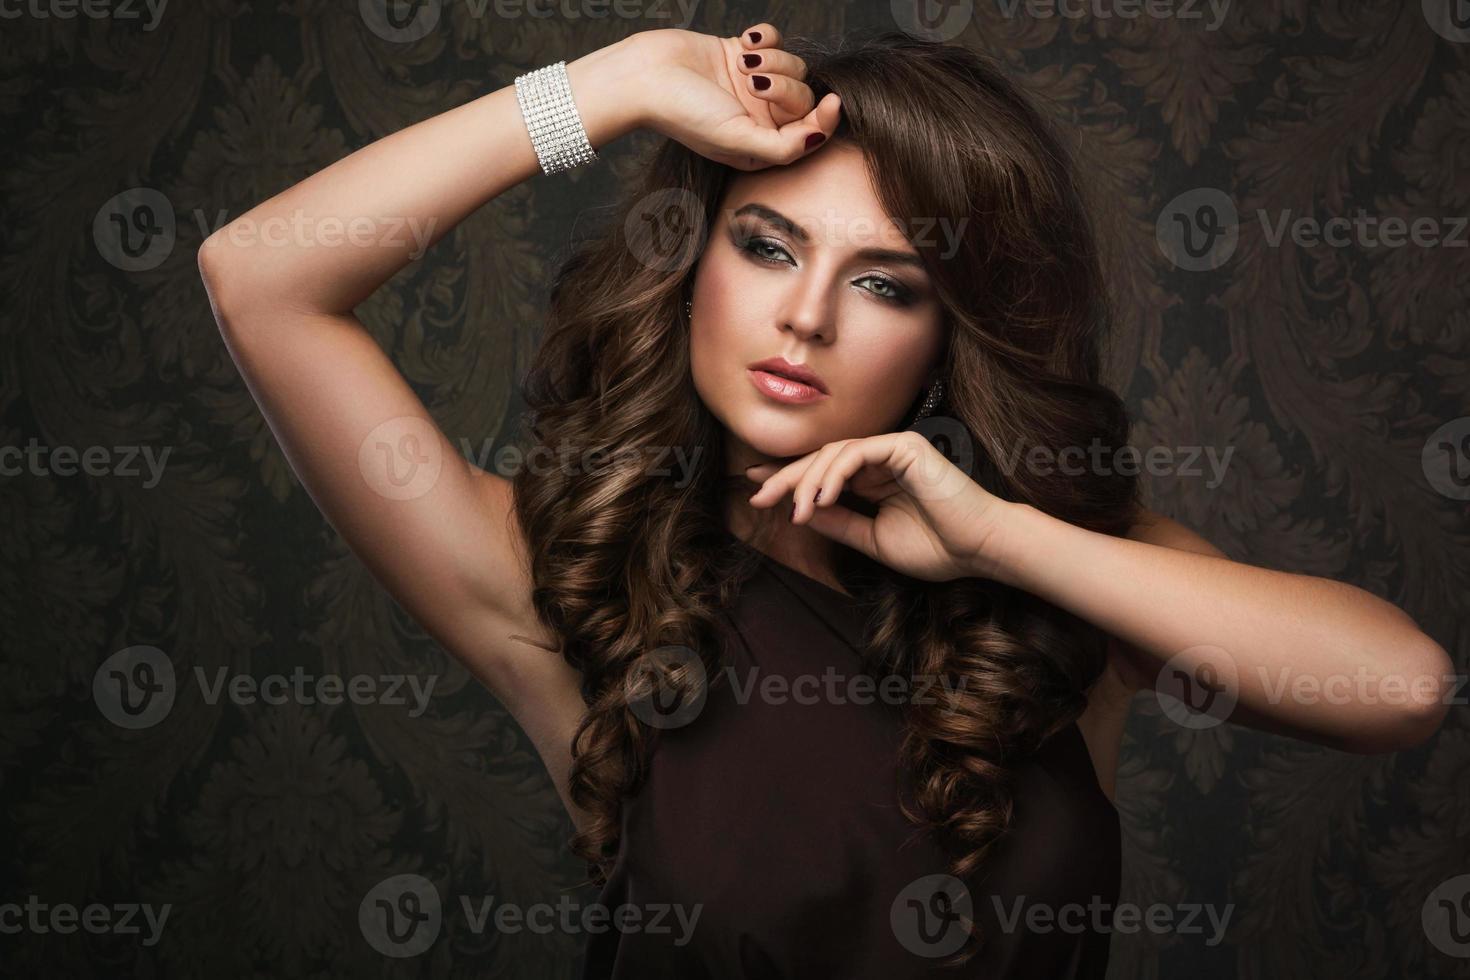 Gorgeous woman with beautiful makeup and hairdo photo